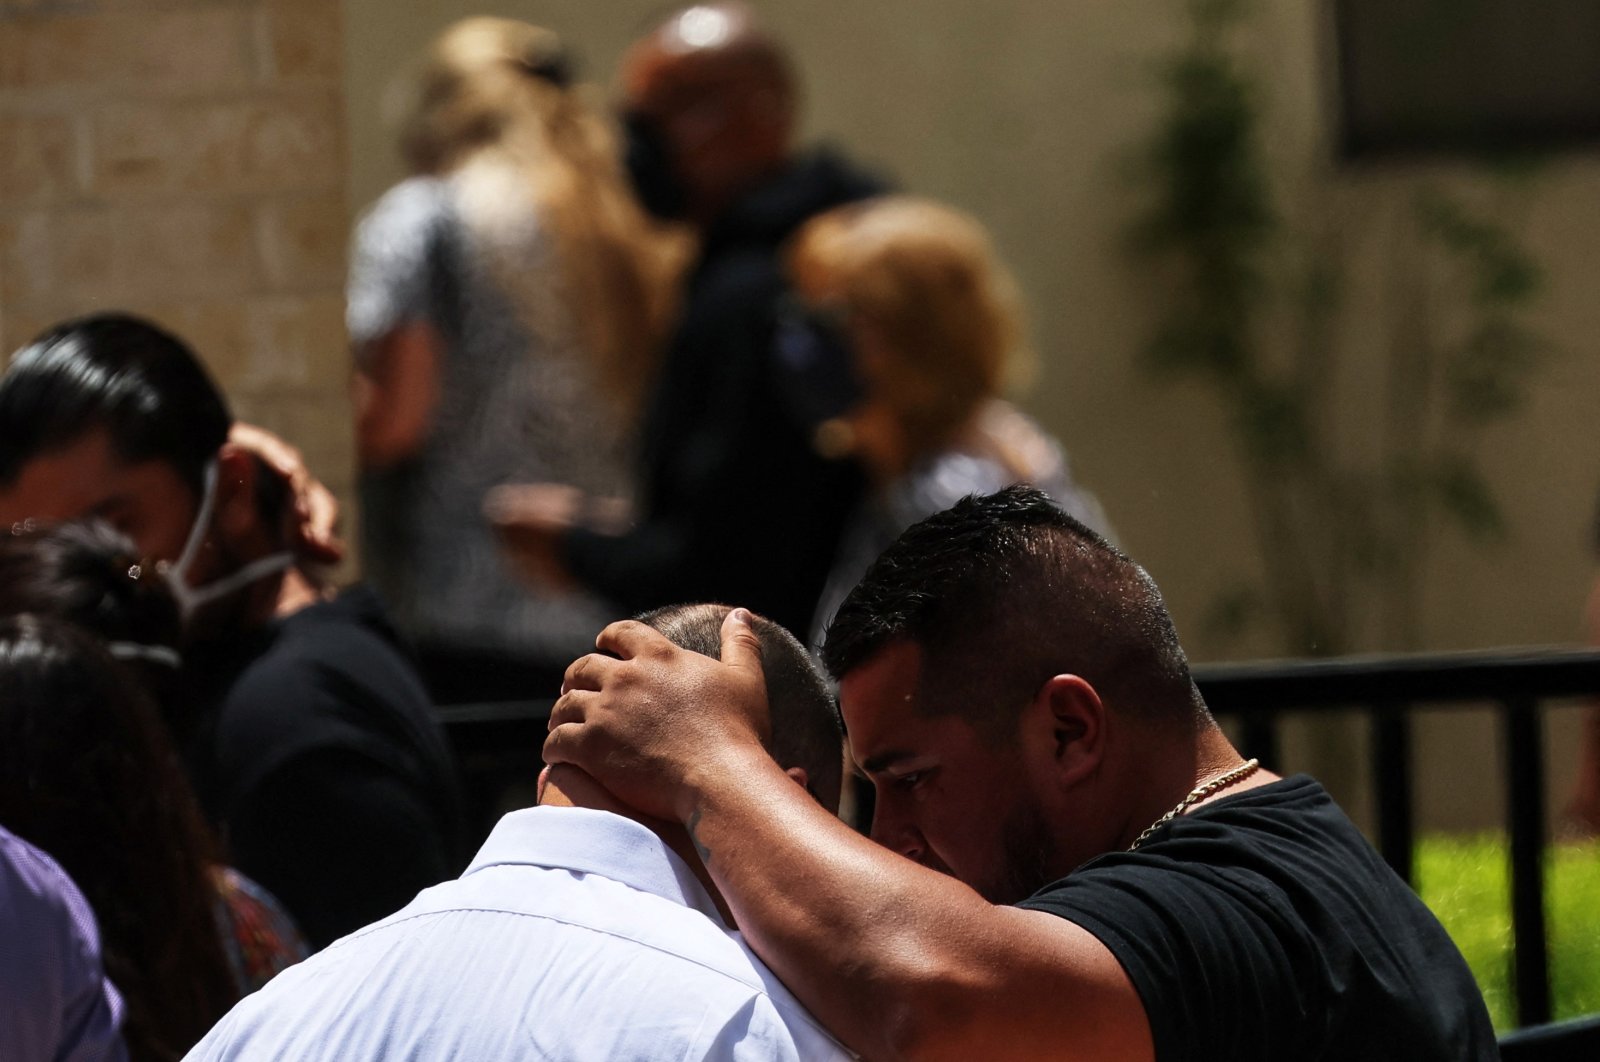 People comfort each other outside the Sacred Heart Catholic Church after attending the funeral service of Amerie Jo Garza, one of the victims of the Robb Elementary school mass shooting that resulted in the deaths of 19 children and two teachers, in Uvalde, Texas, U.S., May 31, 2022. (Reuters Photo)